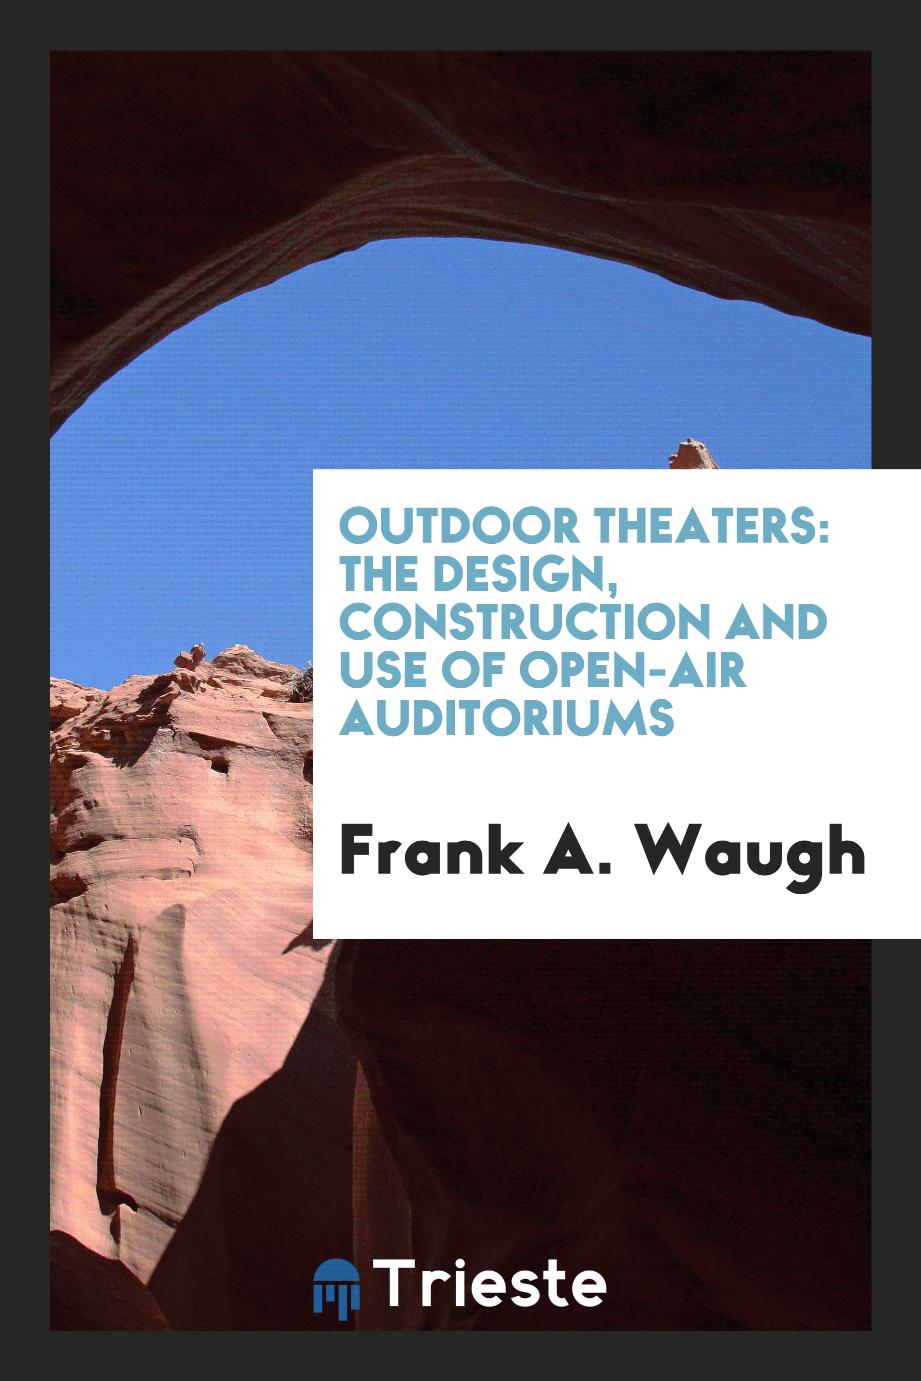 Frank A. Waugh - Outdoor theaters: the design, construction and use of open-air auditoriums